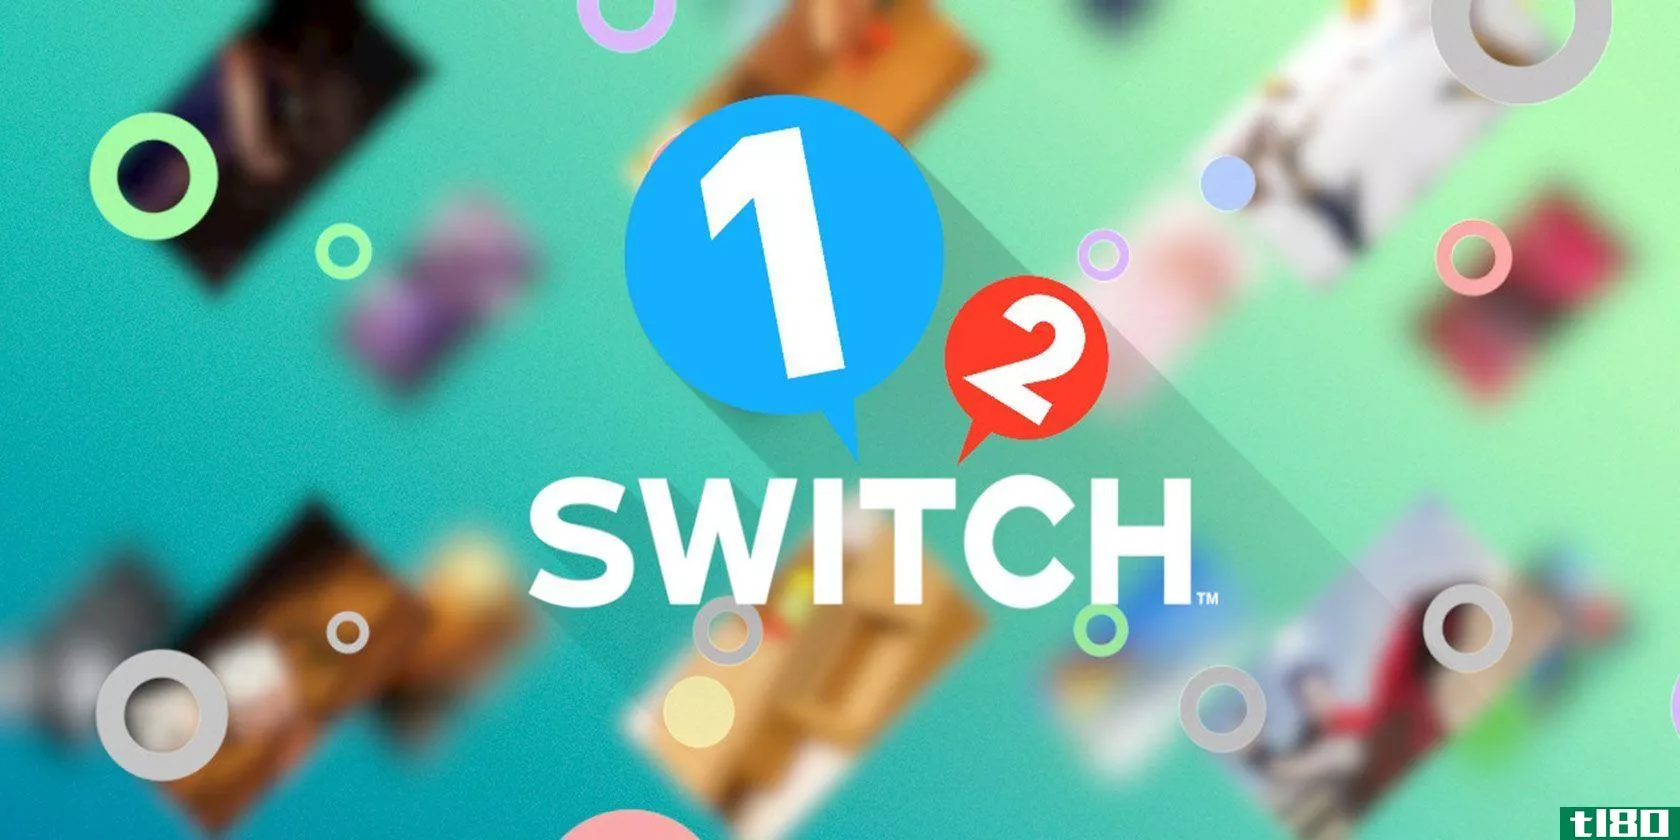 12switch_featured